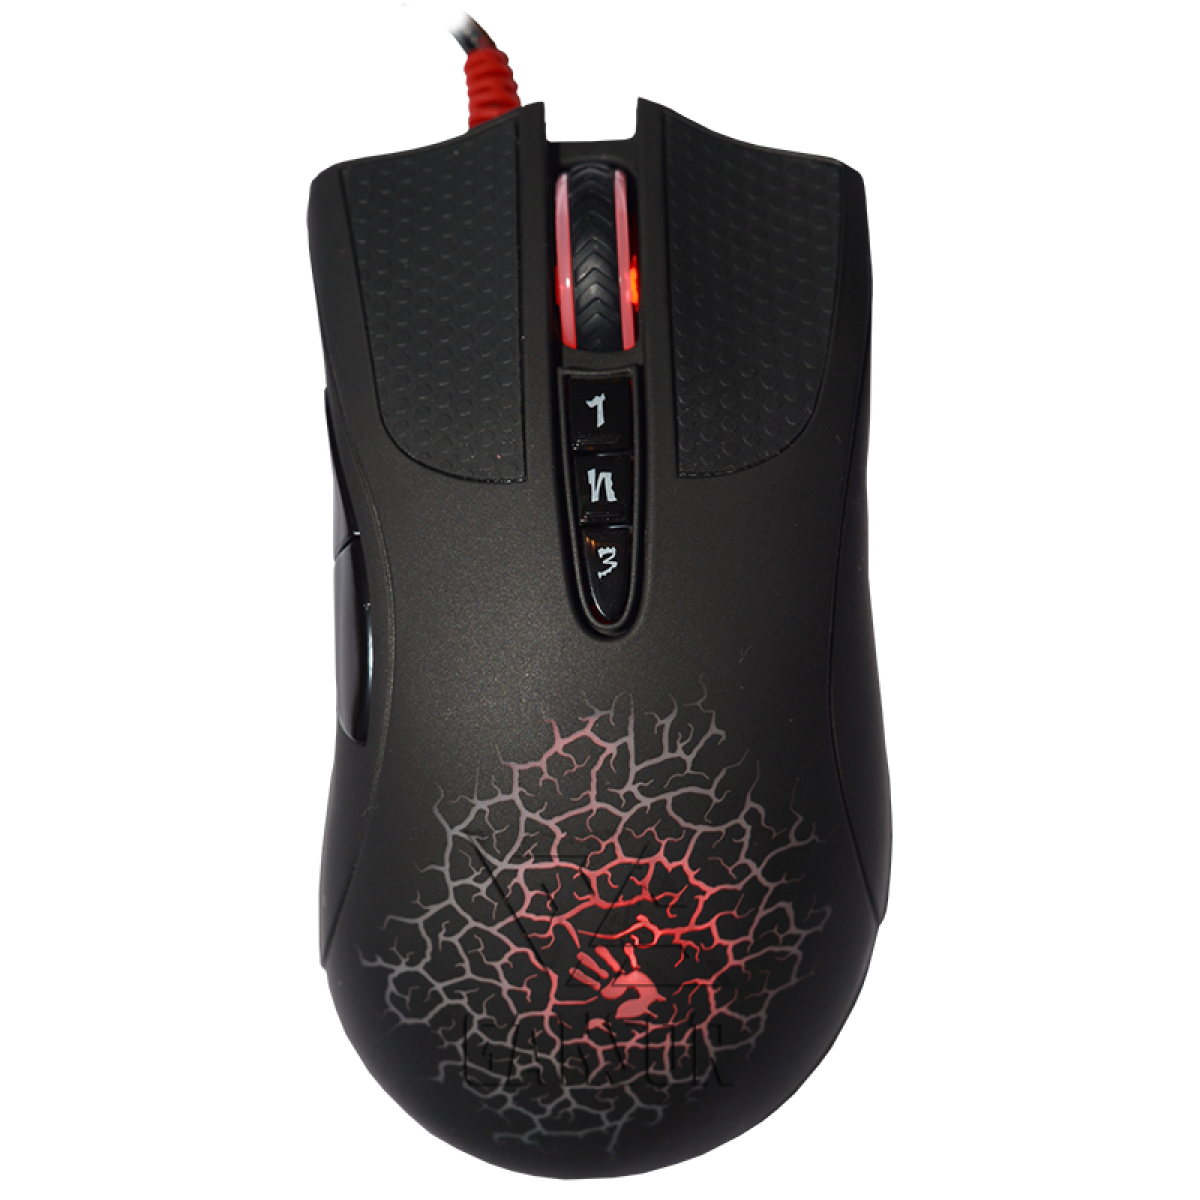 Blacklisted device bloody mouse a4tech rust x7 фото 70